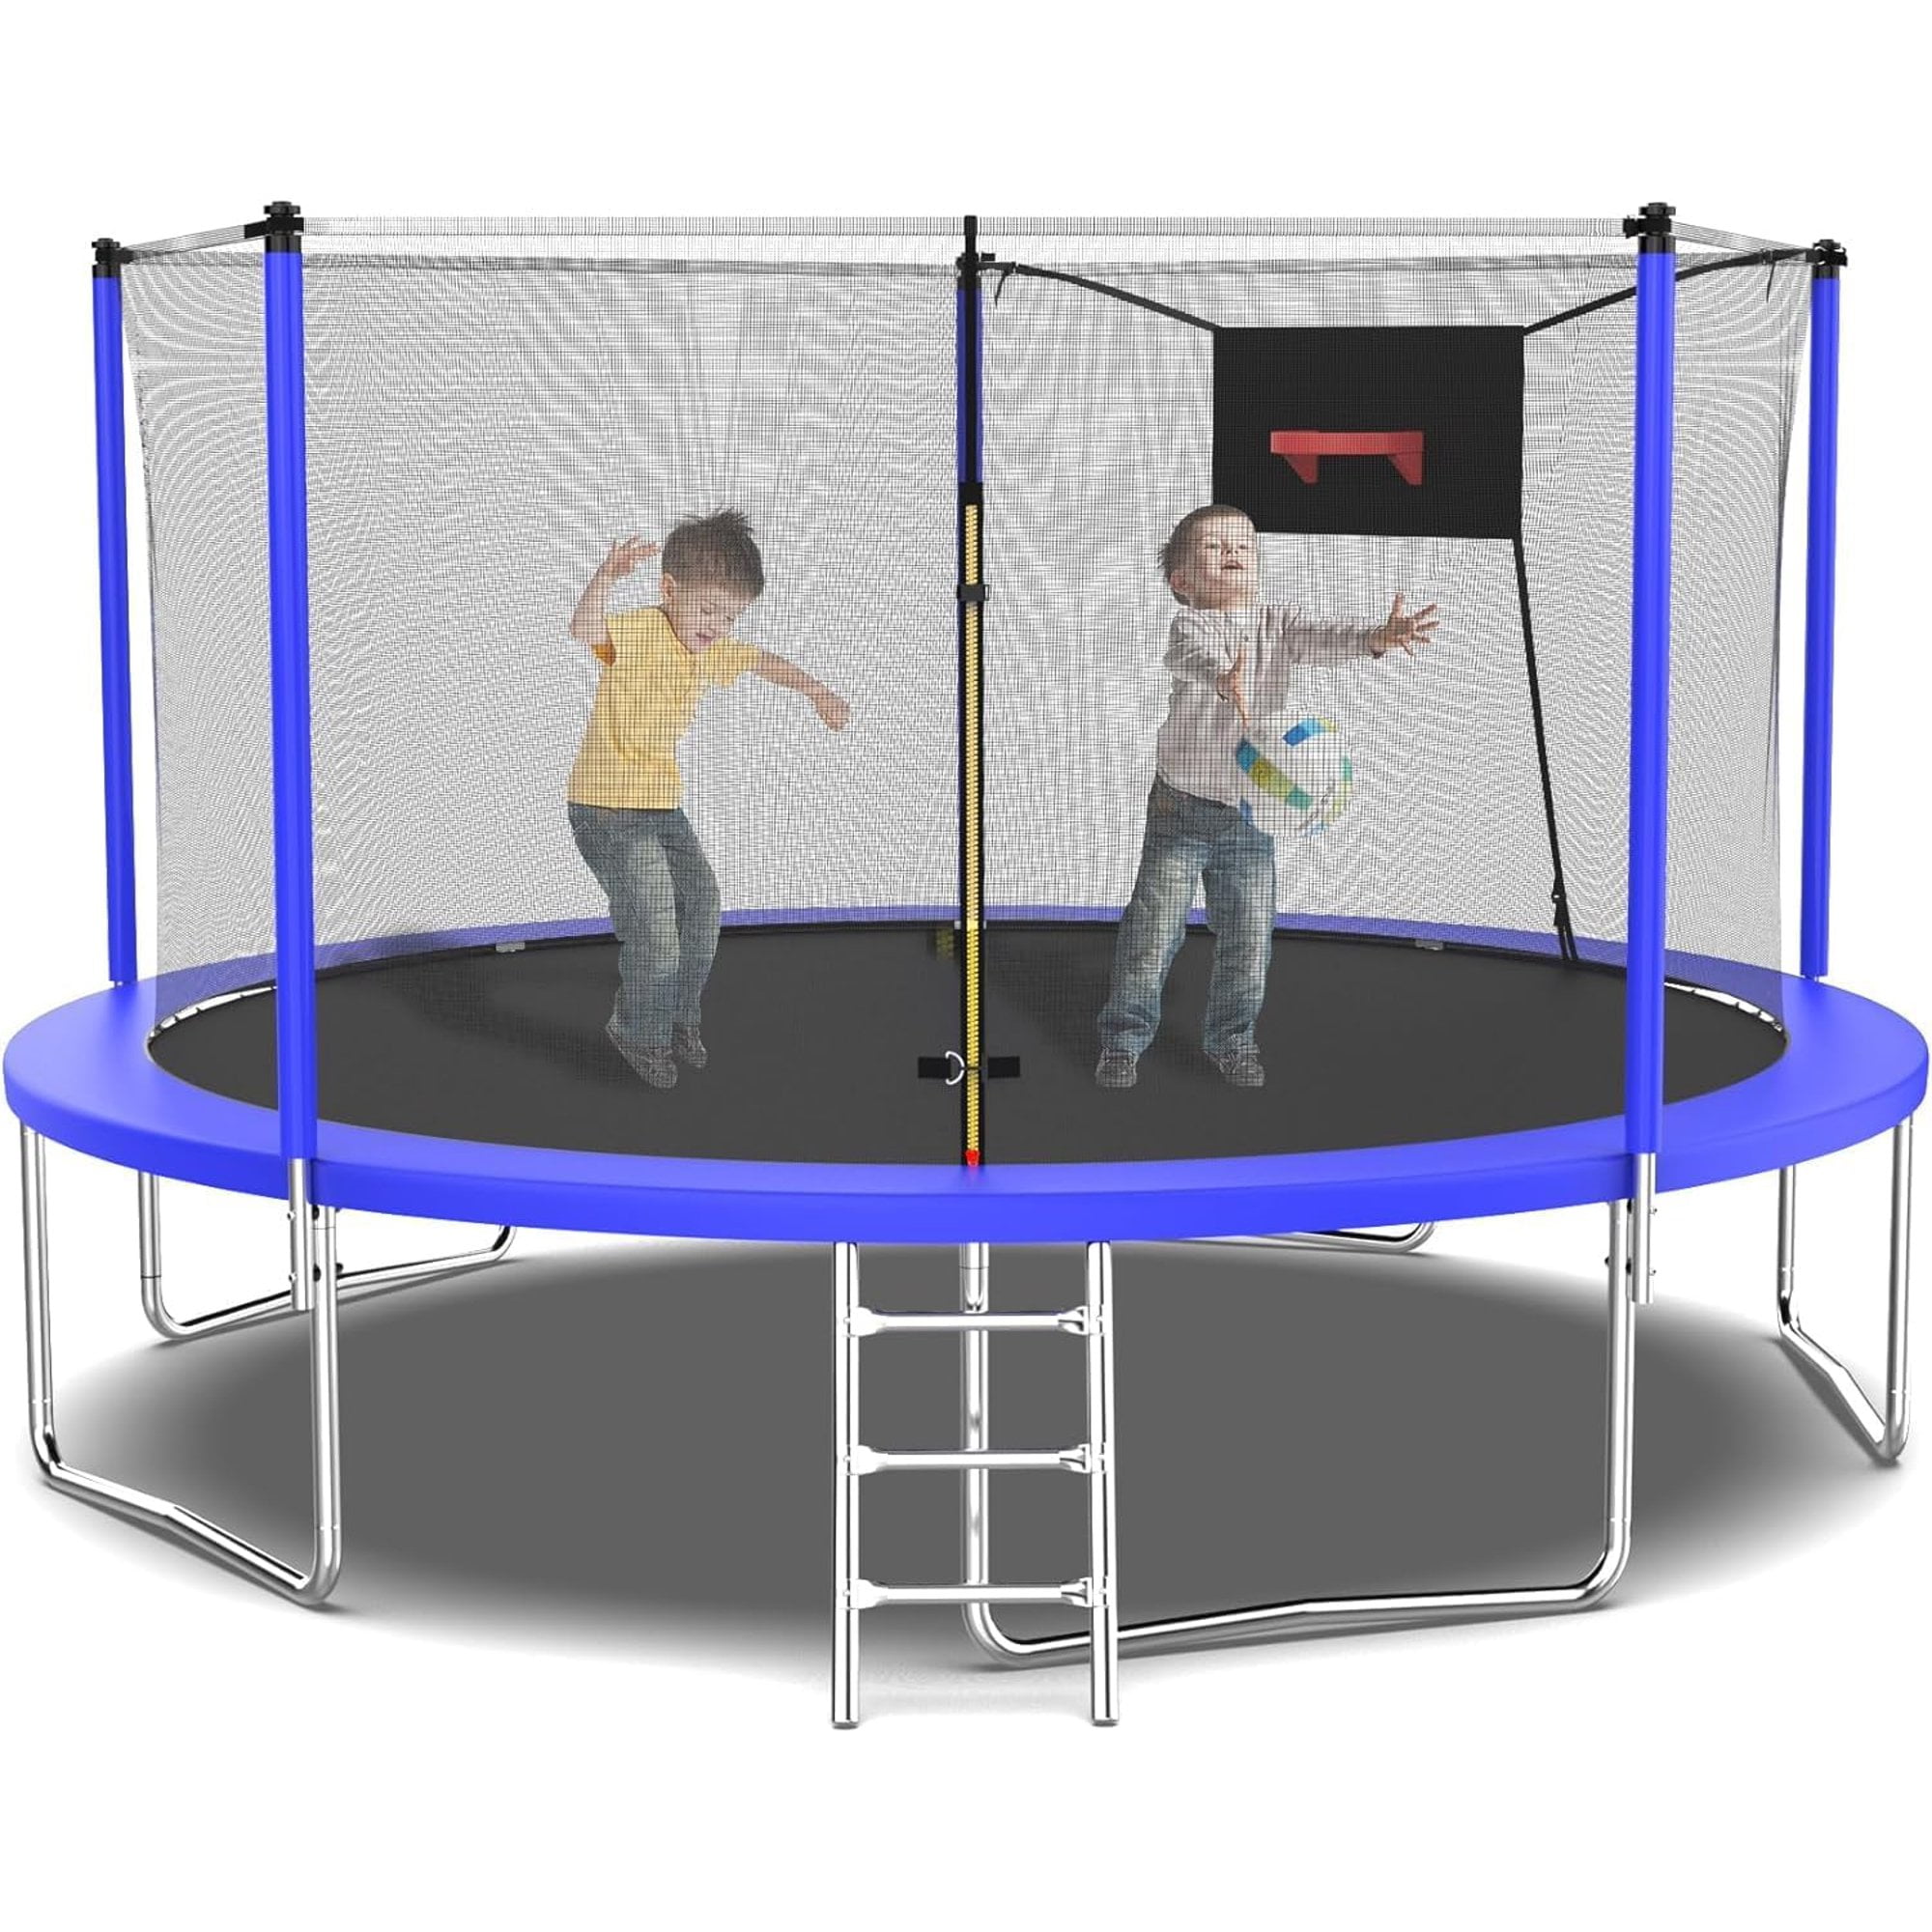 Jump Into Fun Trampoline 14FT, 1400LBS Trampoline for 2-3 Adults or 5-6 Kids, Trampoline with Enclosure, Basketball Hoop, Ladder, Recreational Outdoor Spray Galvanized Trampoline, ASTM CPC CPSIA